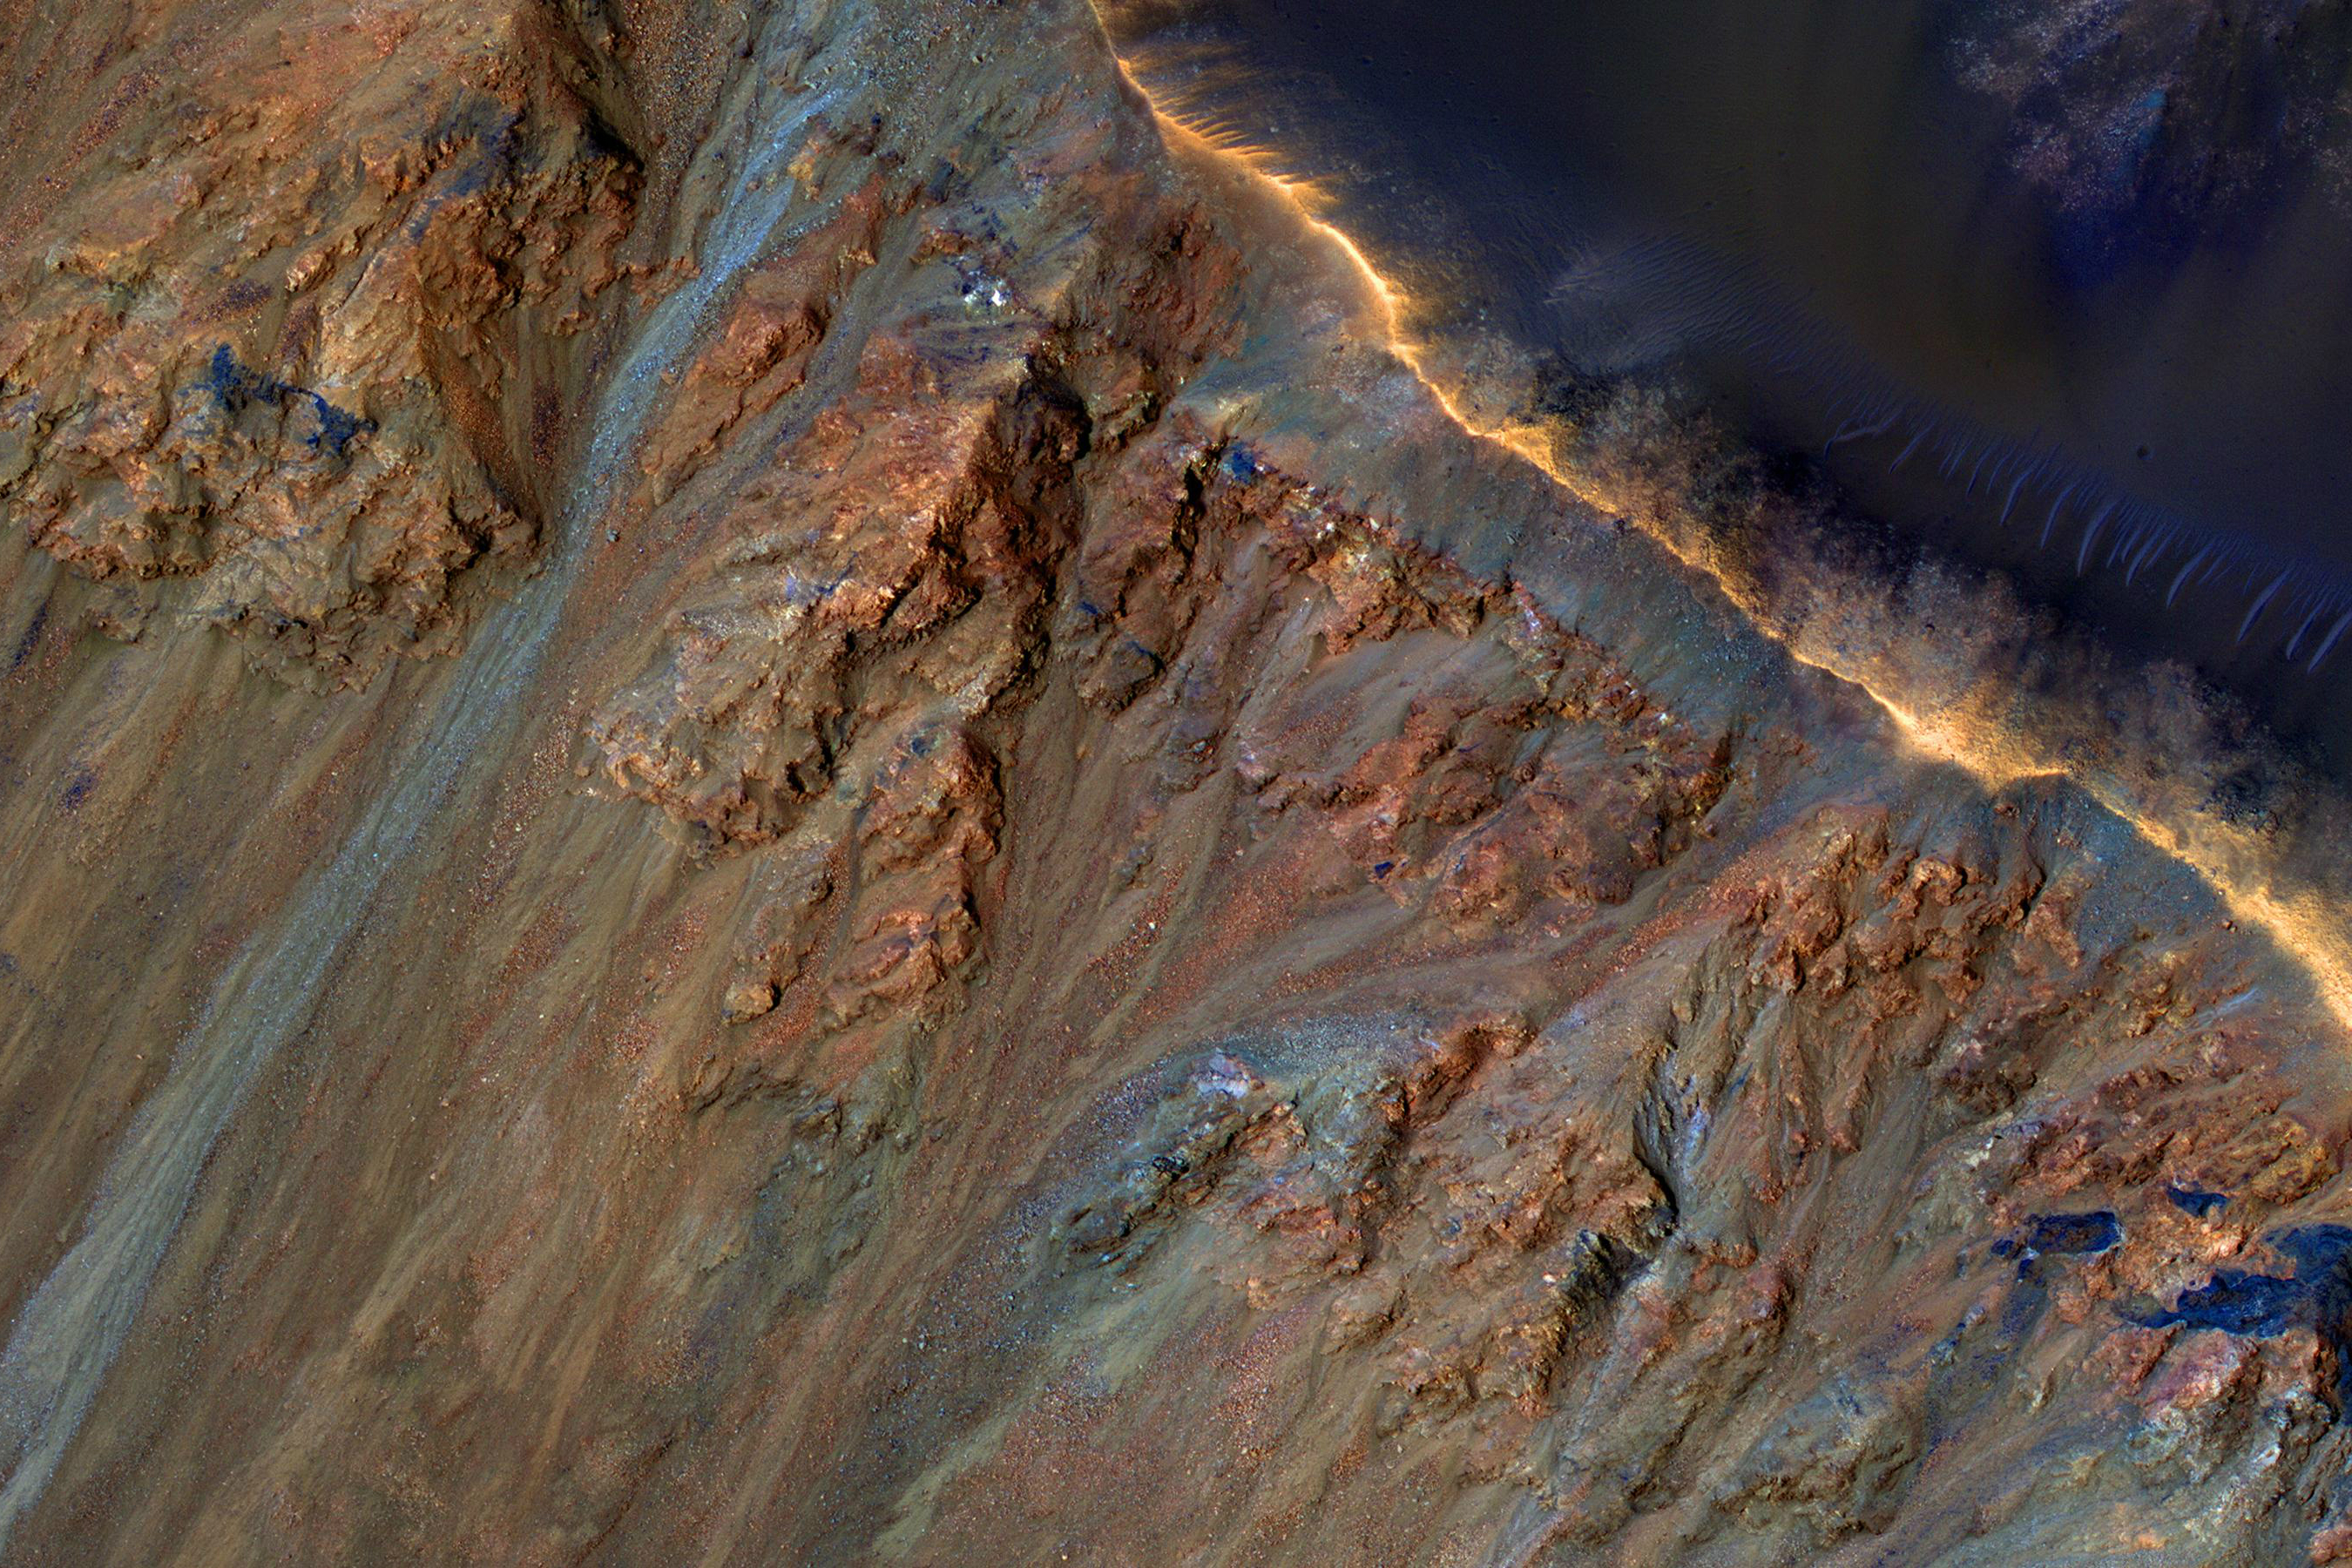 Although large gullies (ravines) are concentrated at higher latitudes, there are gullies on steep slopes in equatorial regions, as seen in this image captured by NASA's Mars Reconnaissance Orbiter (MRO). An enhanced-color closeup shows part of the rim and inner slope of Krupac Crater located just 7.8 degrees south of the equator.